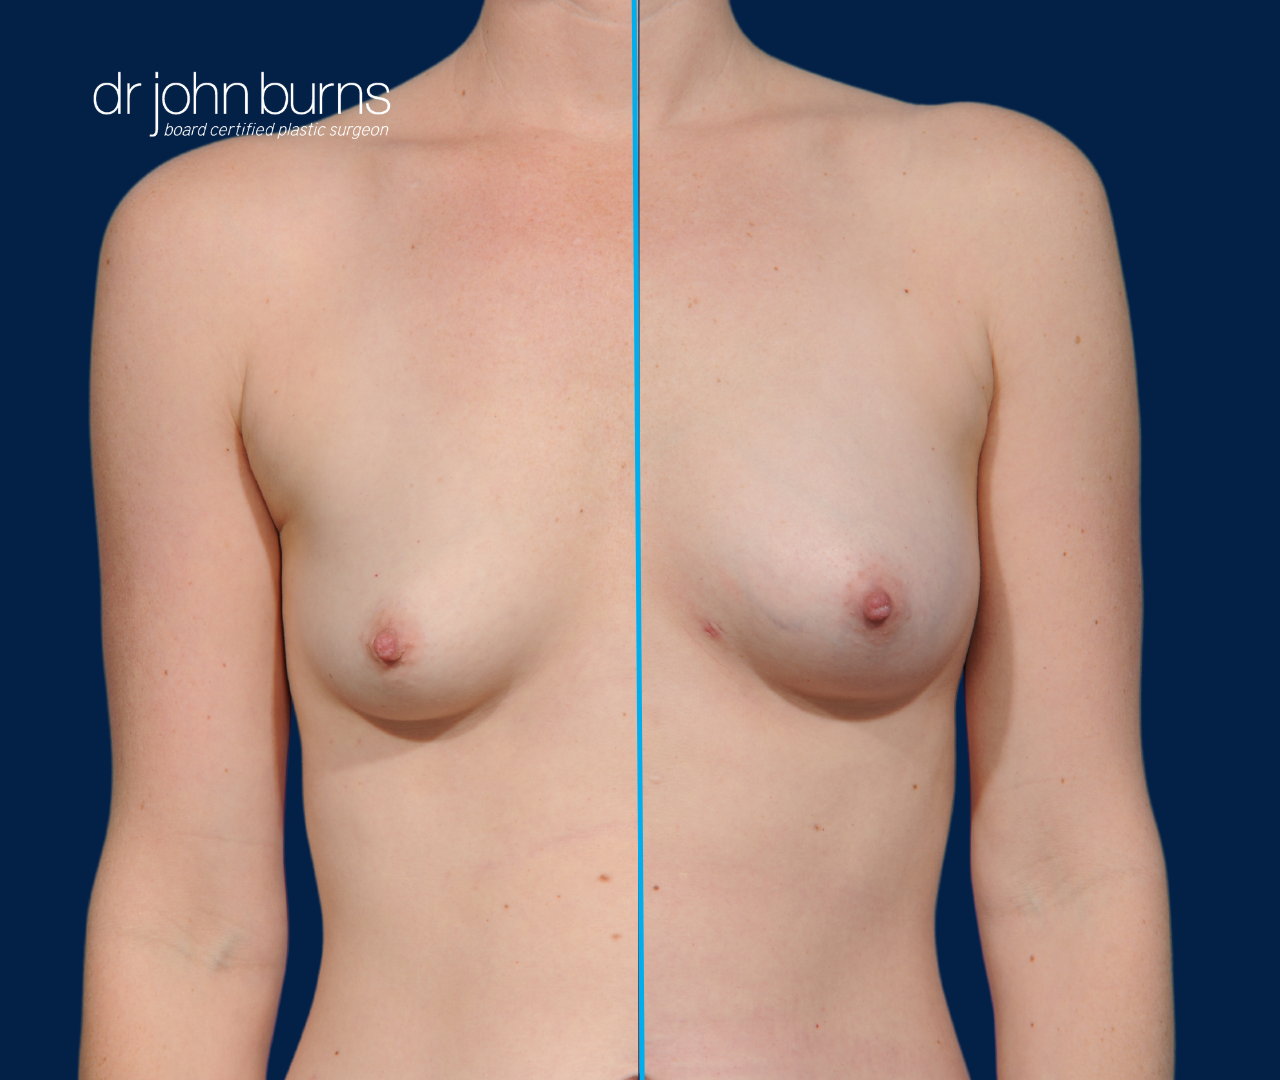 case 4- split screen before & after fat transfer to breast by top plastic surgeon, Dr. John Burns